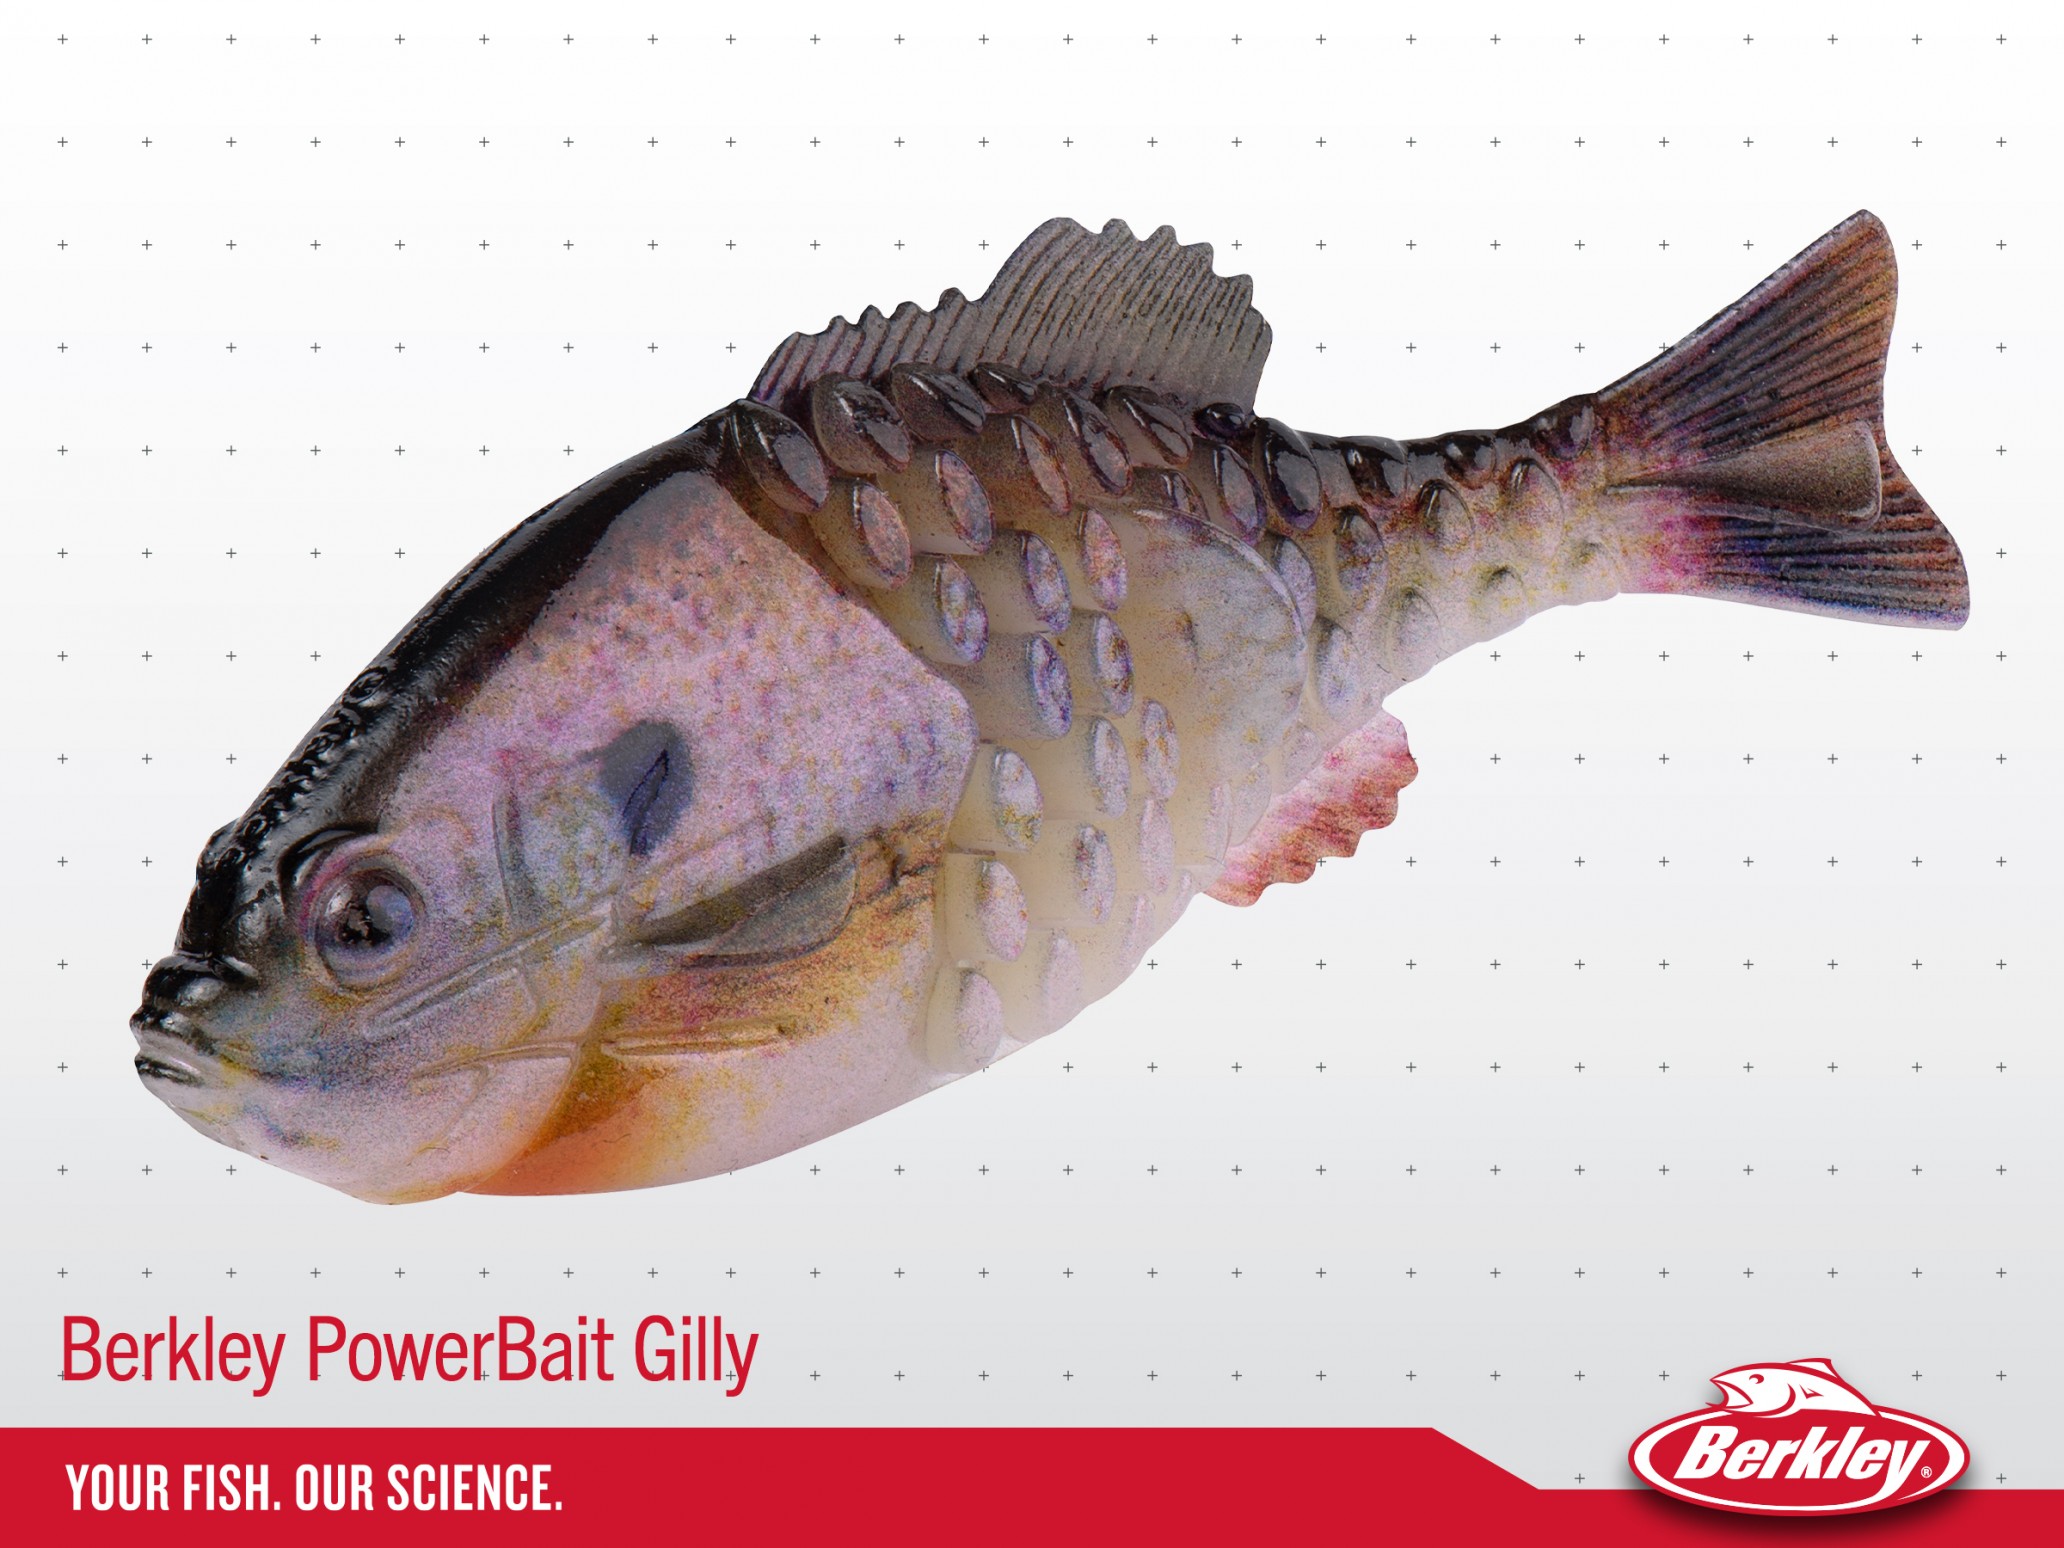 Berkley PowerBait Gilly Wins Best of Show at 2021 ICAST – Anglers